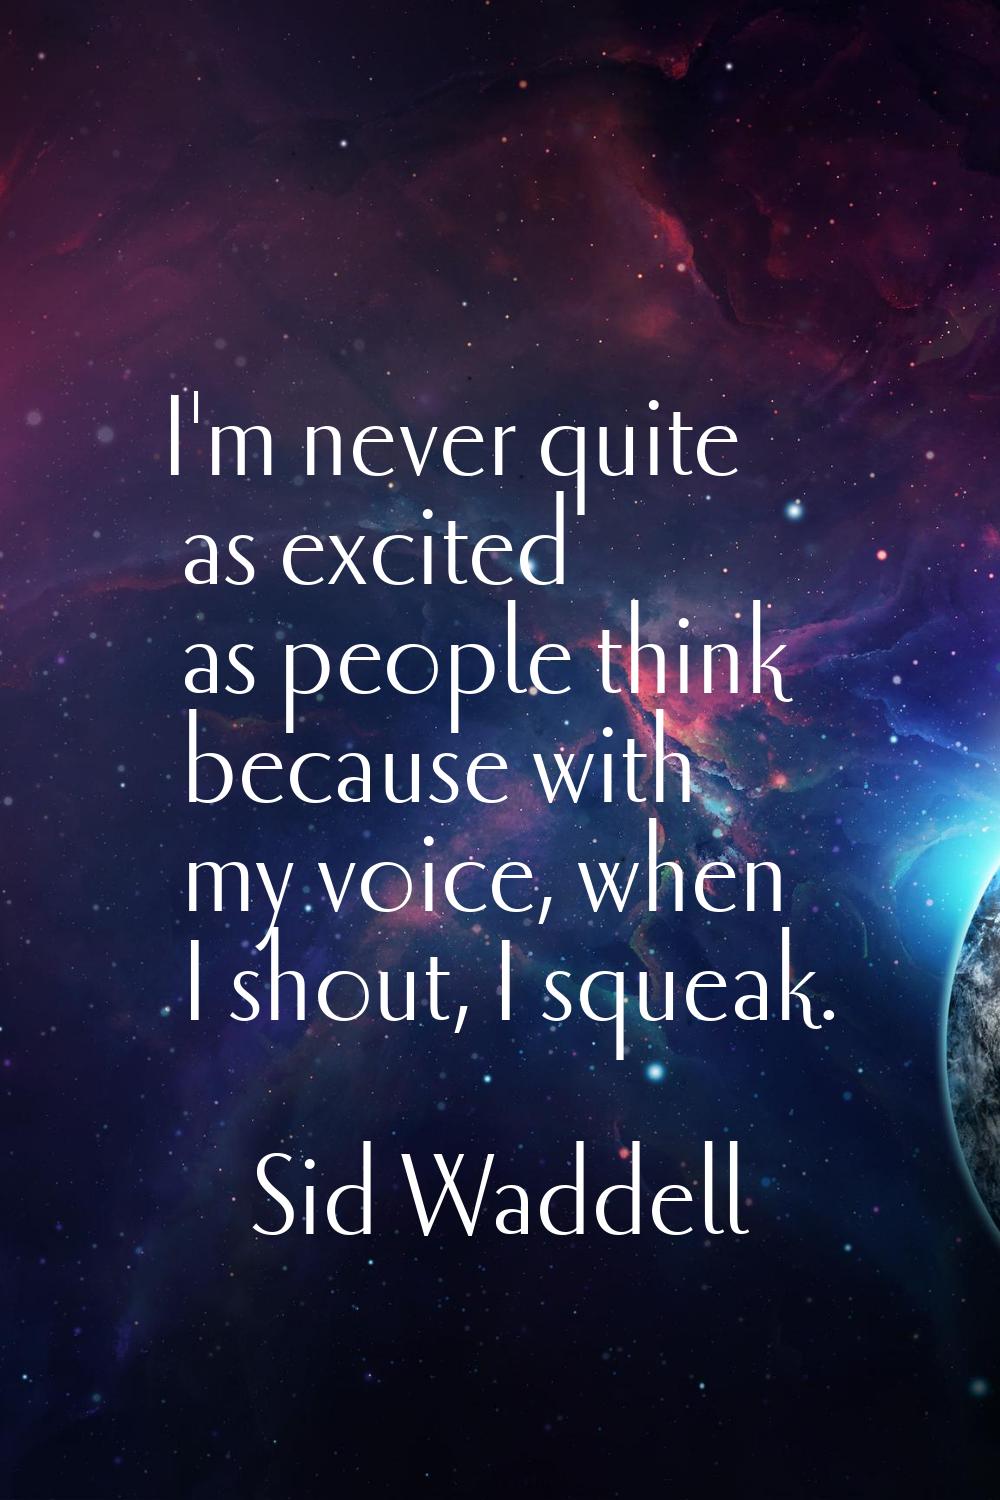 I'm never quite as excited as people think because with my voice, when I shout, I squeak.